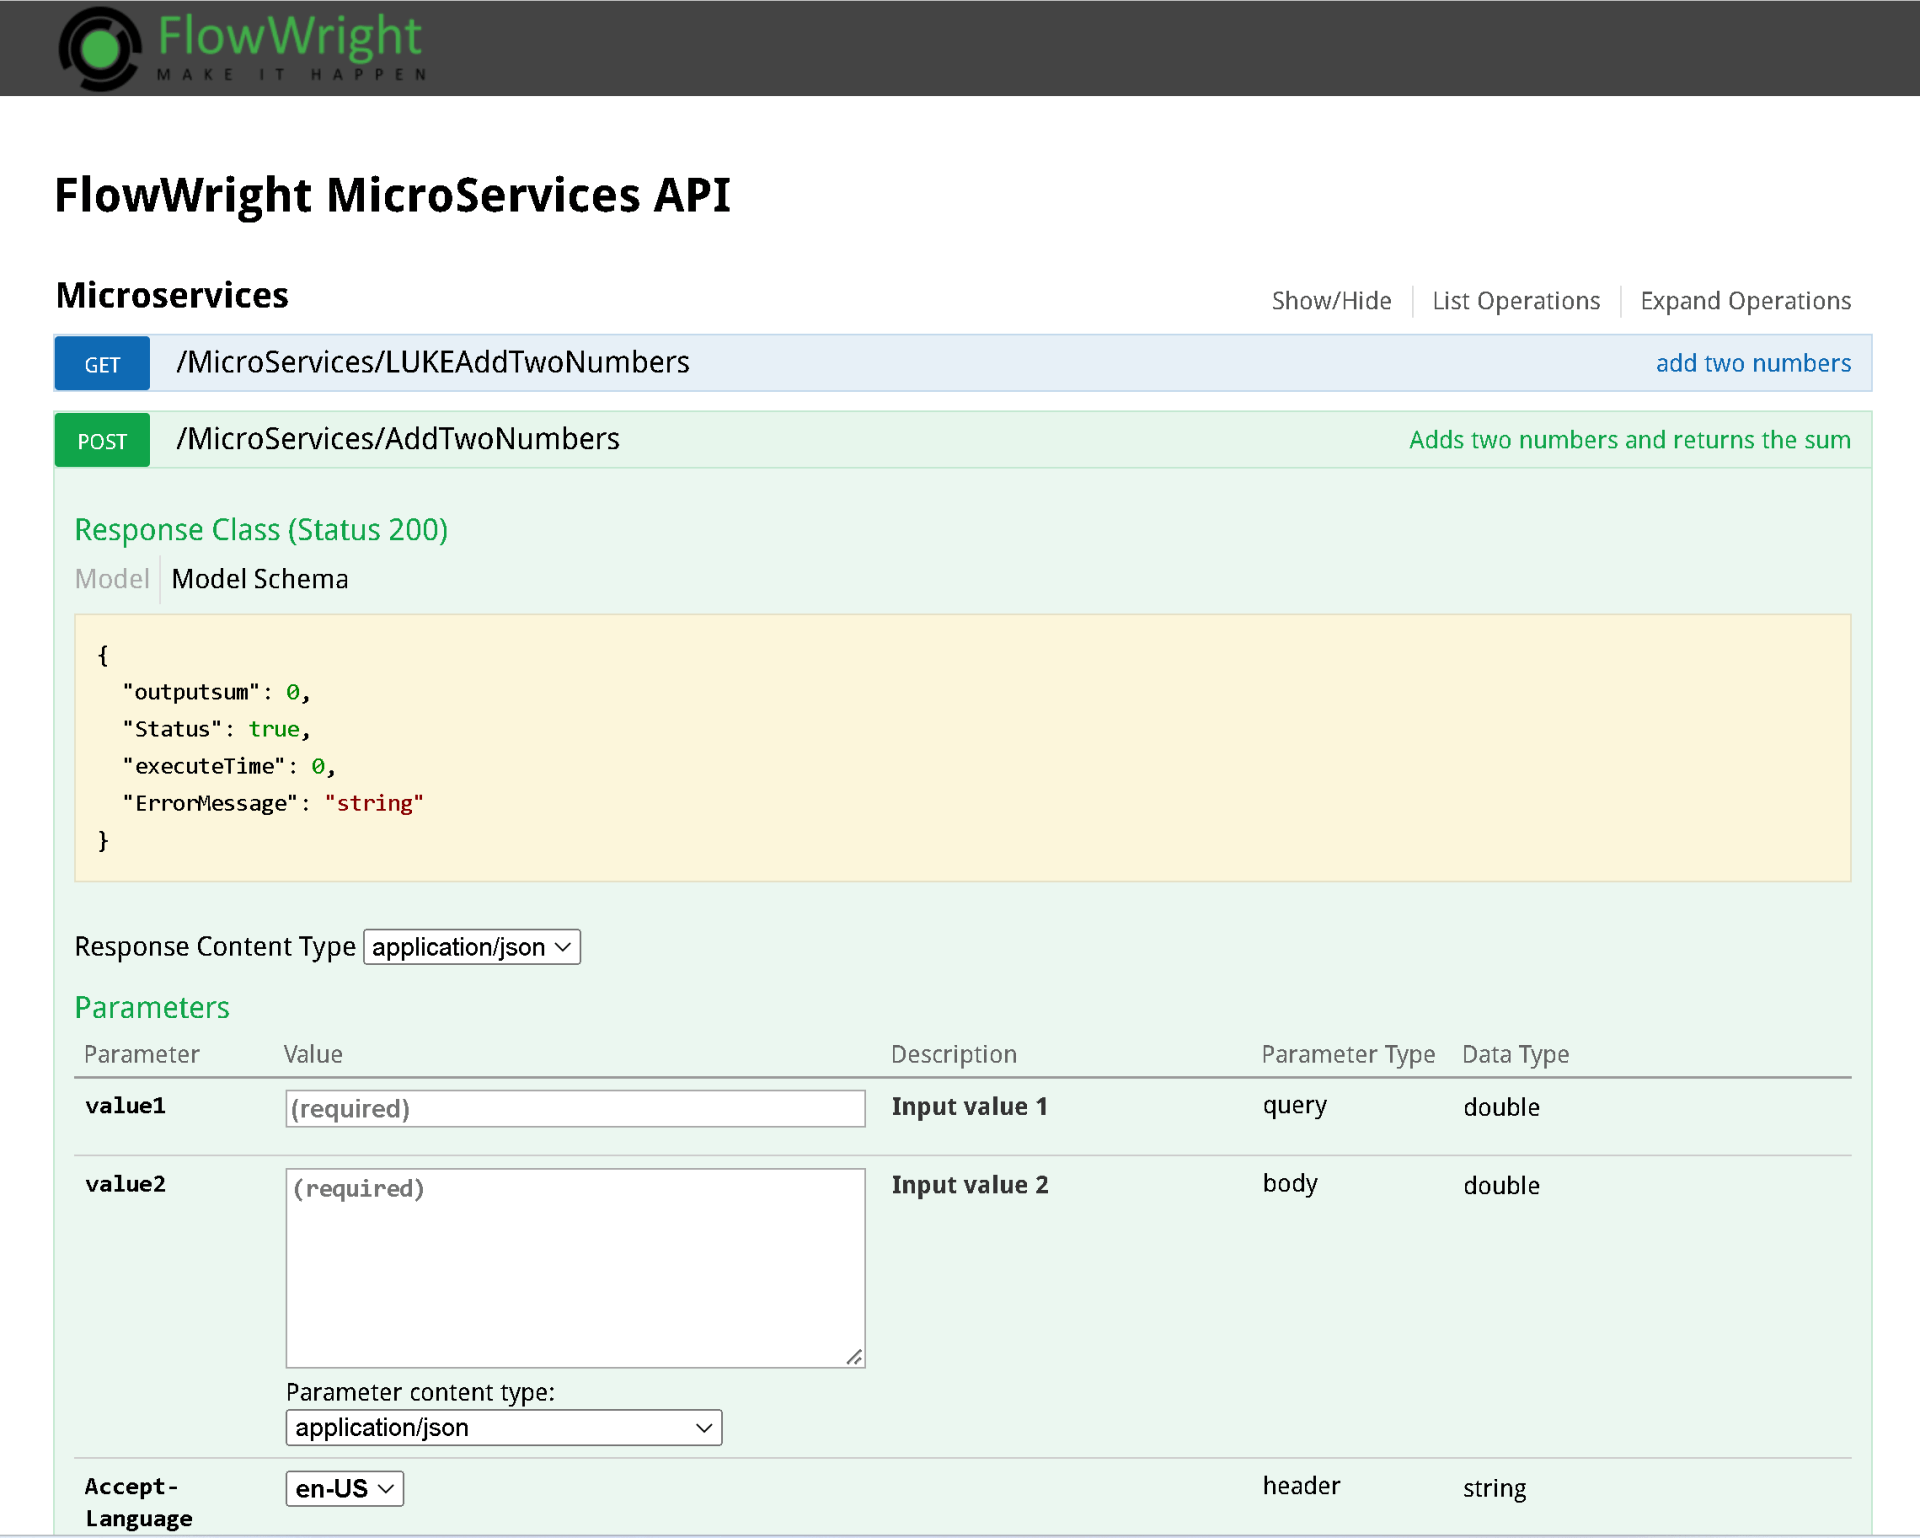 A screenshot of a flowwright microservices api page